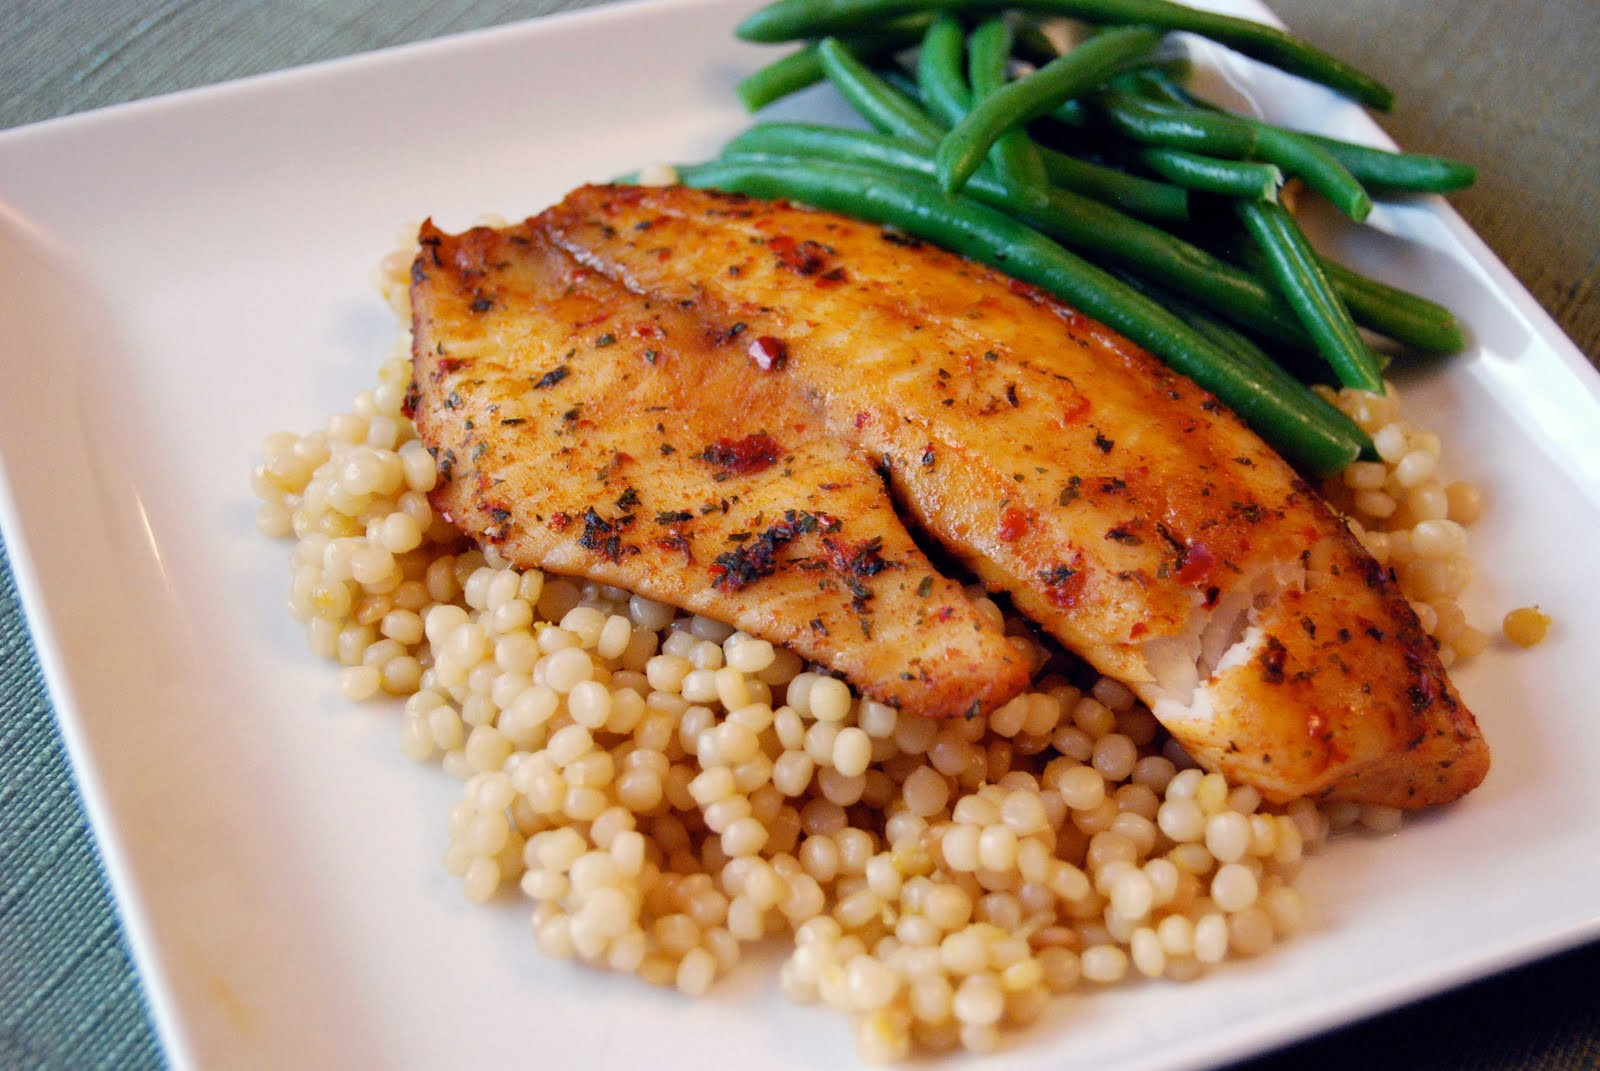 Healthy Fish Dinner Recipes
 How to Maintain Healthy Weight